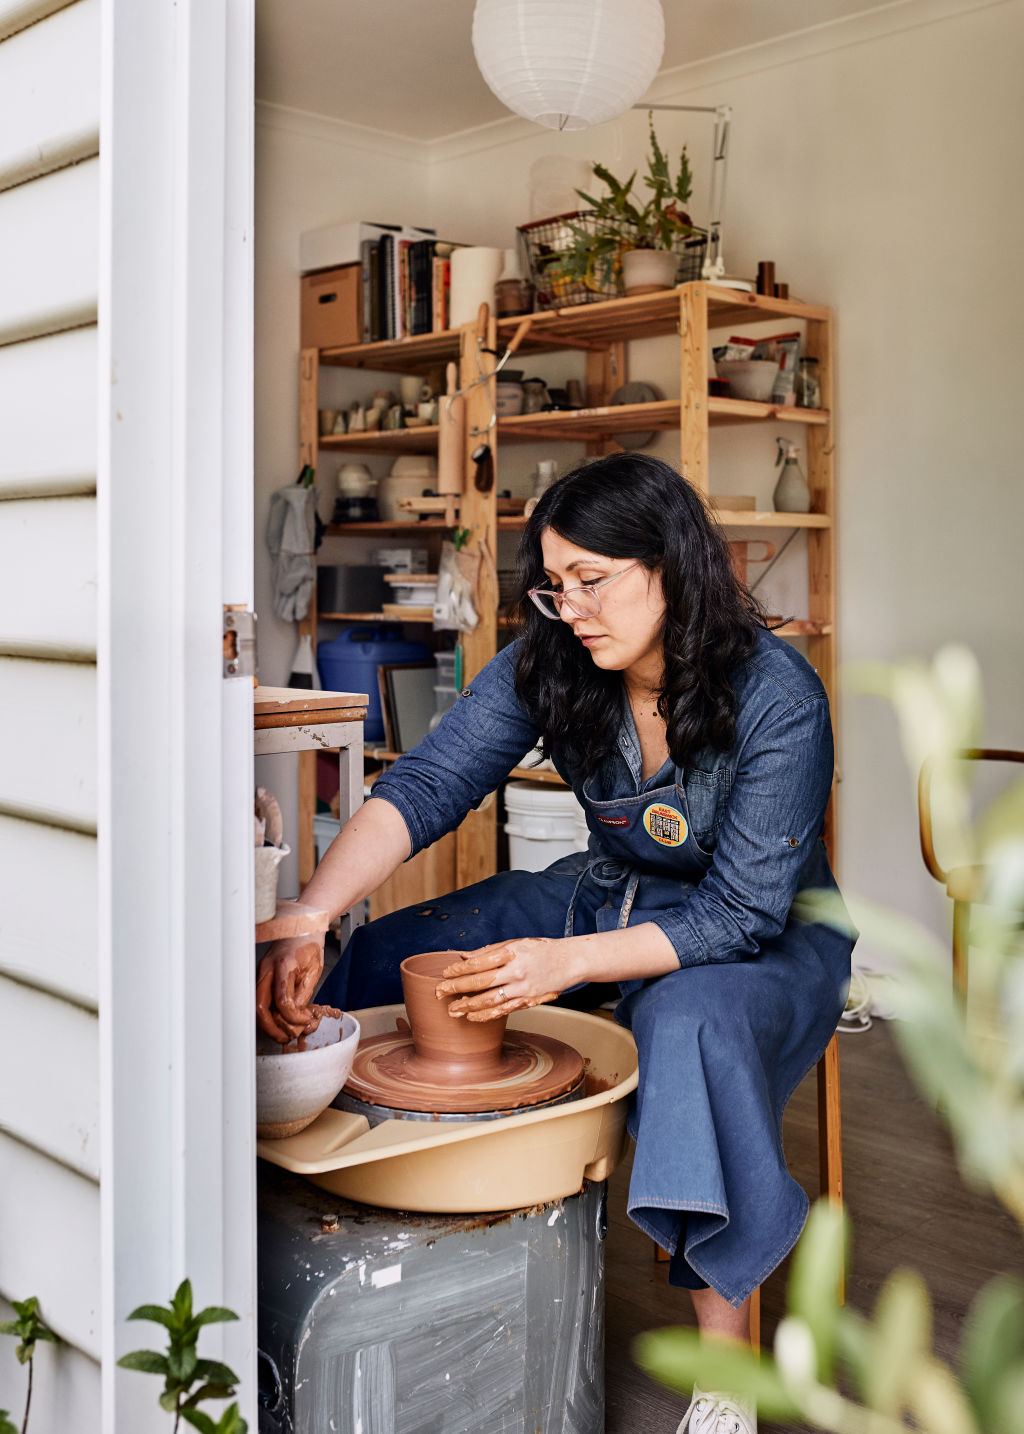 Cassie Hansen is a part-time editor of Artichoke magazine who has taken to the pottery wheel all in the name of chasing her own creative aspirations. Photo: Amelia Stanwix